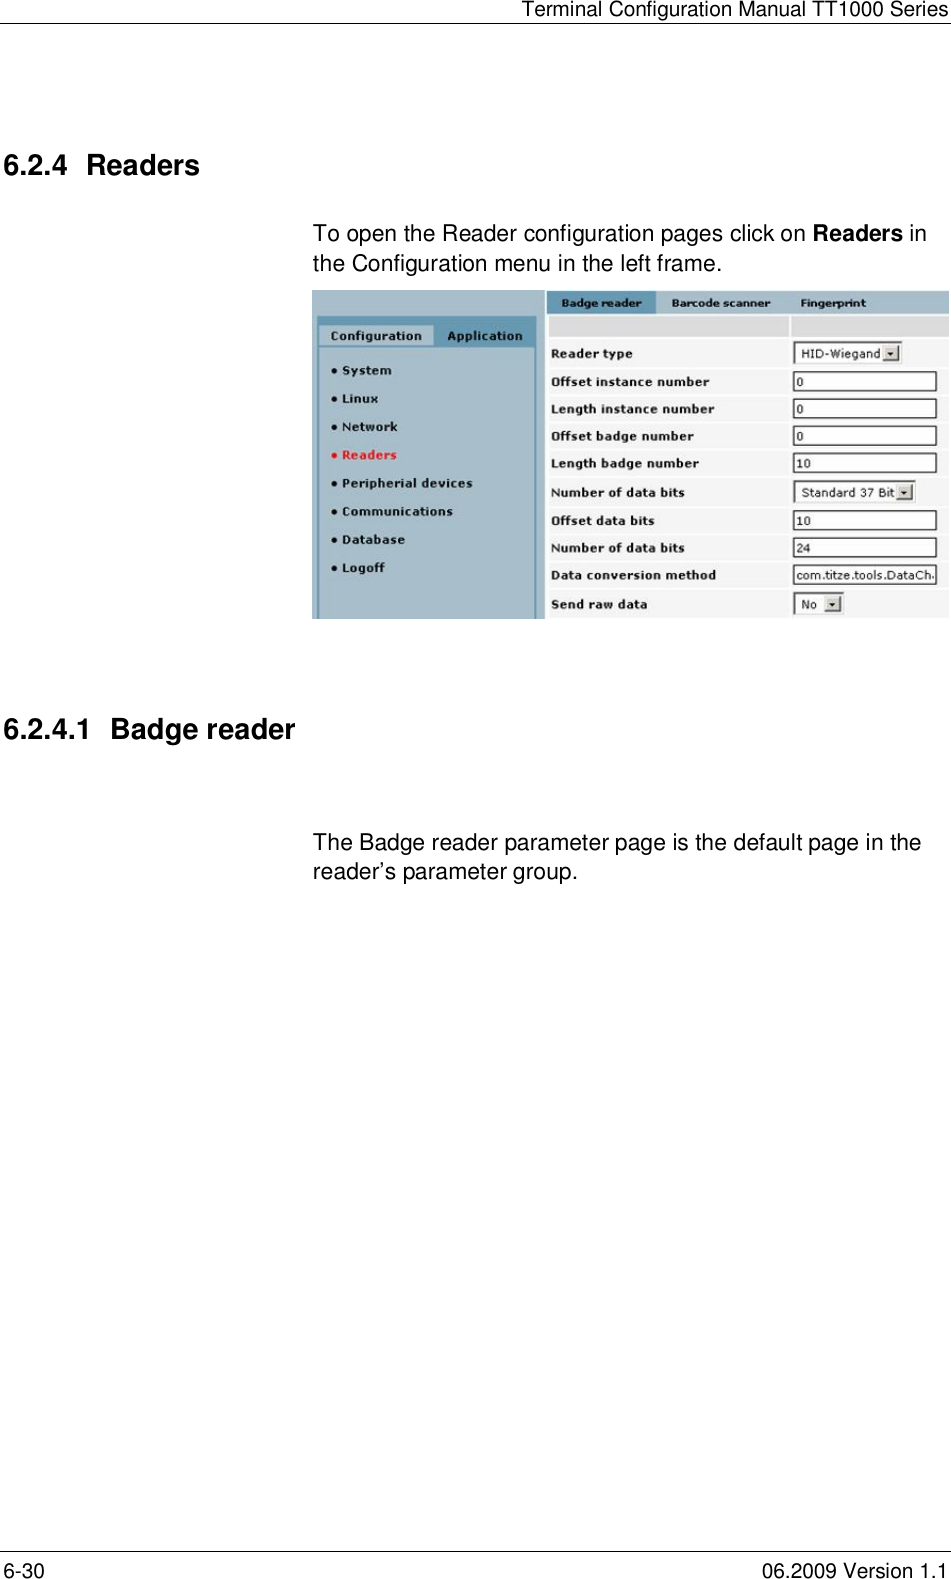 Terminal Configuration Manual TT1000 Series6-30 06.2009 Version 1.16.2.4 ReadersTo open the Reader configuration pages click on Readers inthe Configuration menu in the left frame.6.2.4.1  Badge readerThe Badge reader parameter page is the default page in thereader’s parameter group.